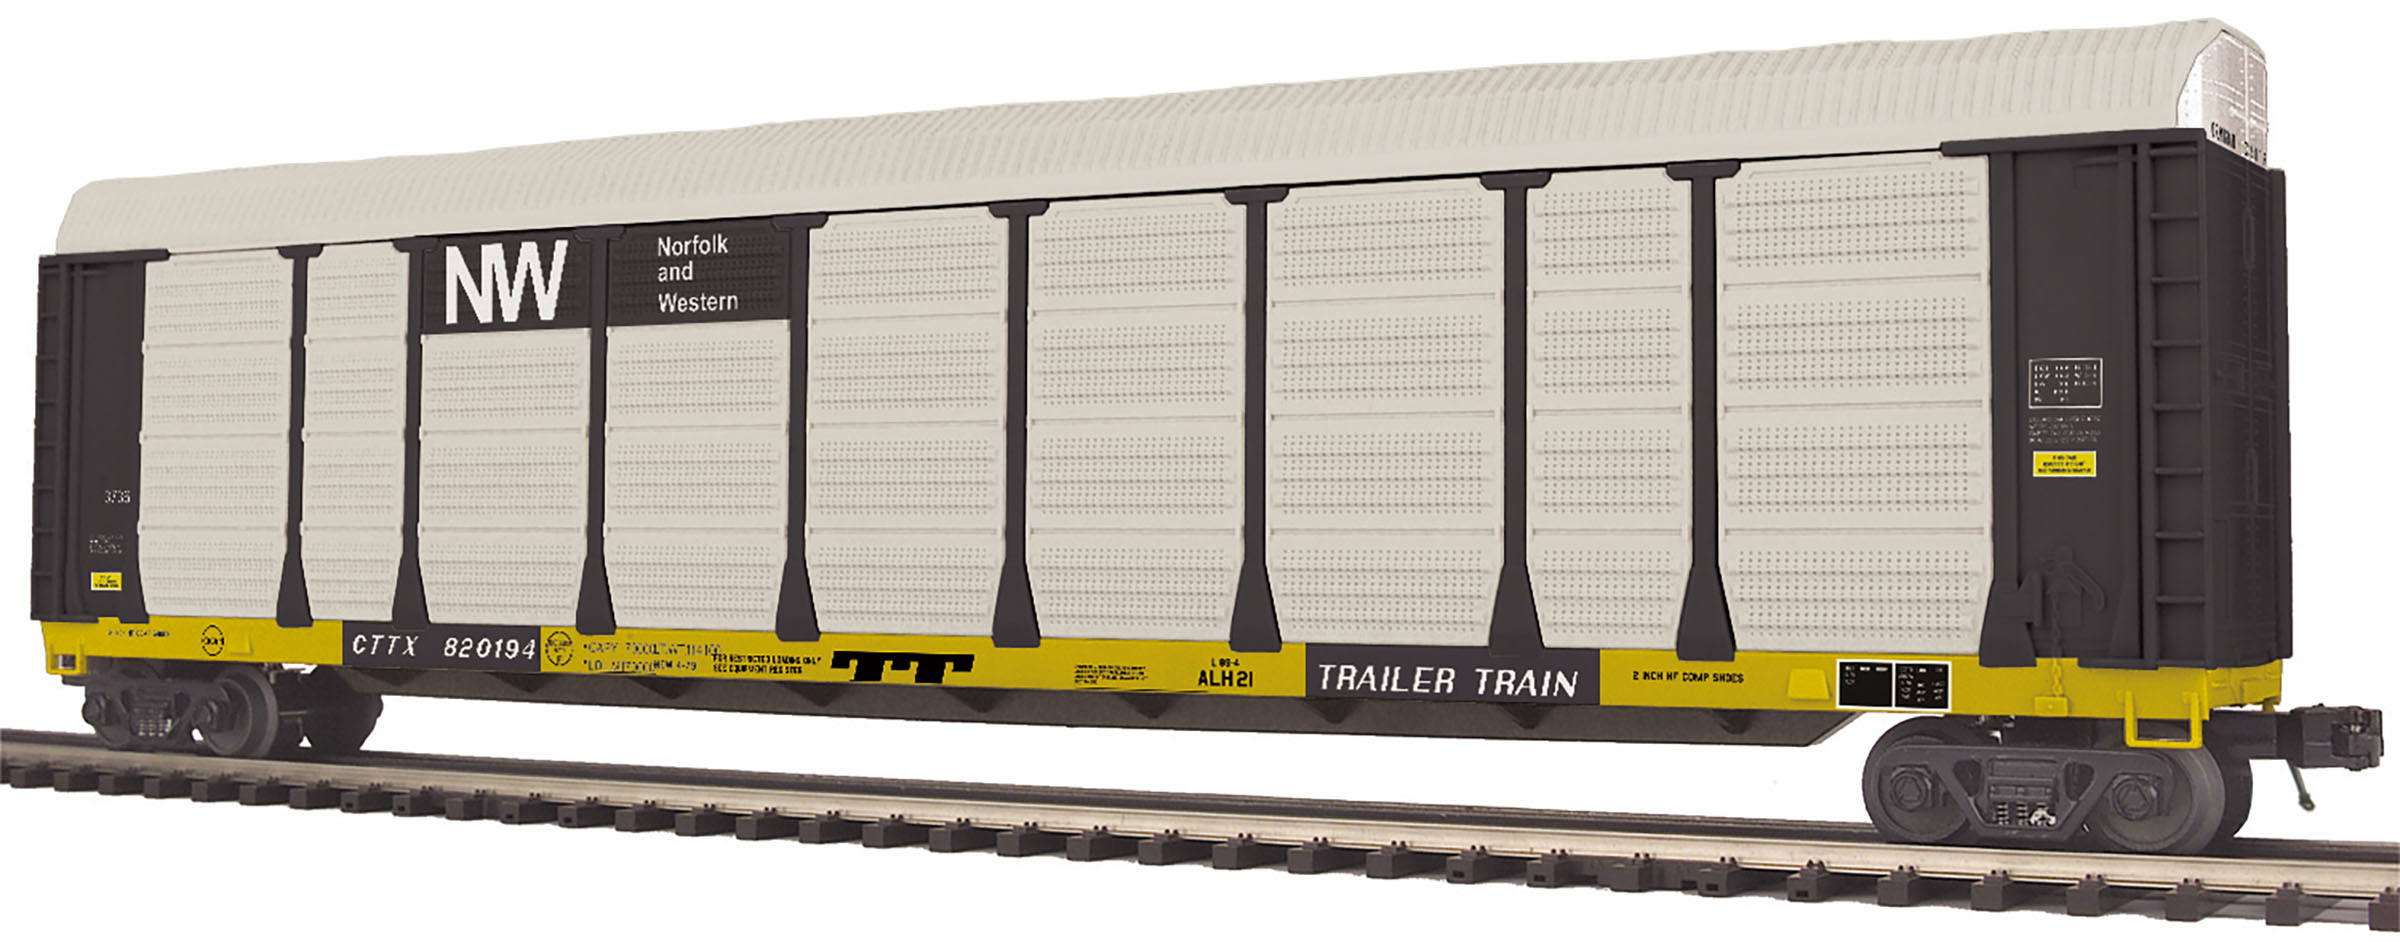 MTH Premier Norfolk & Western Corrugated Auto Carrier O Scale 20-95340 for sale online